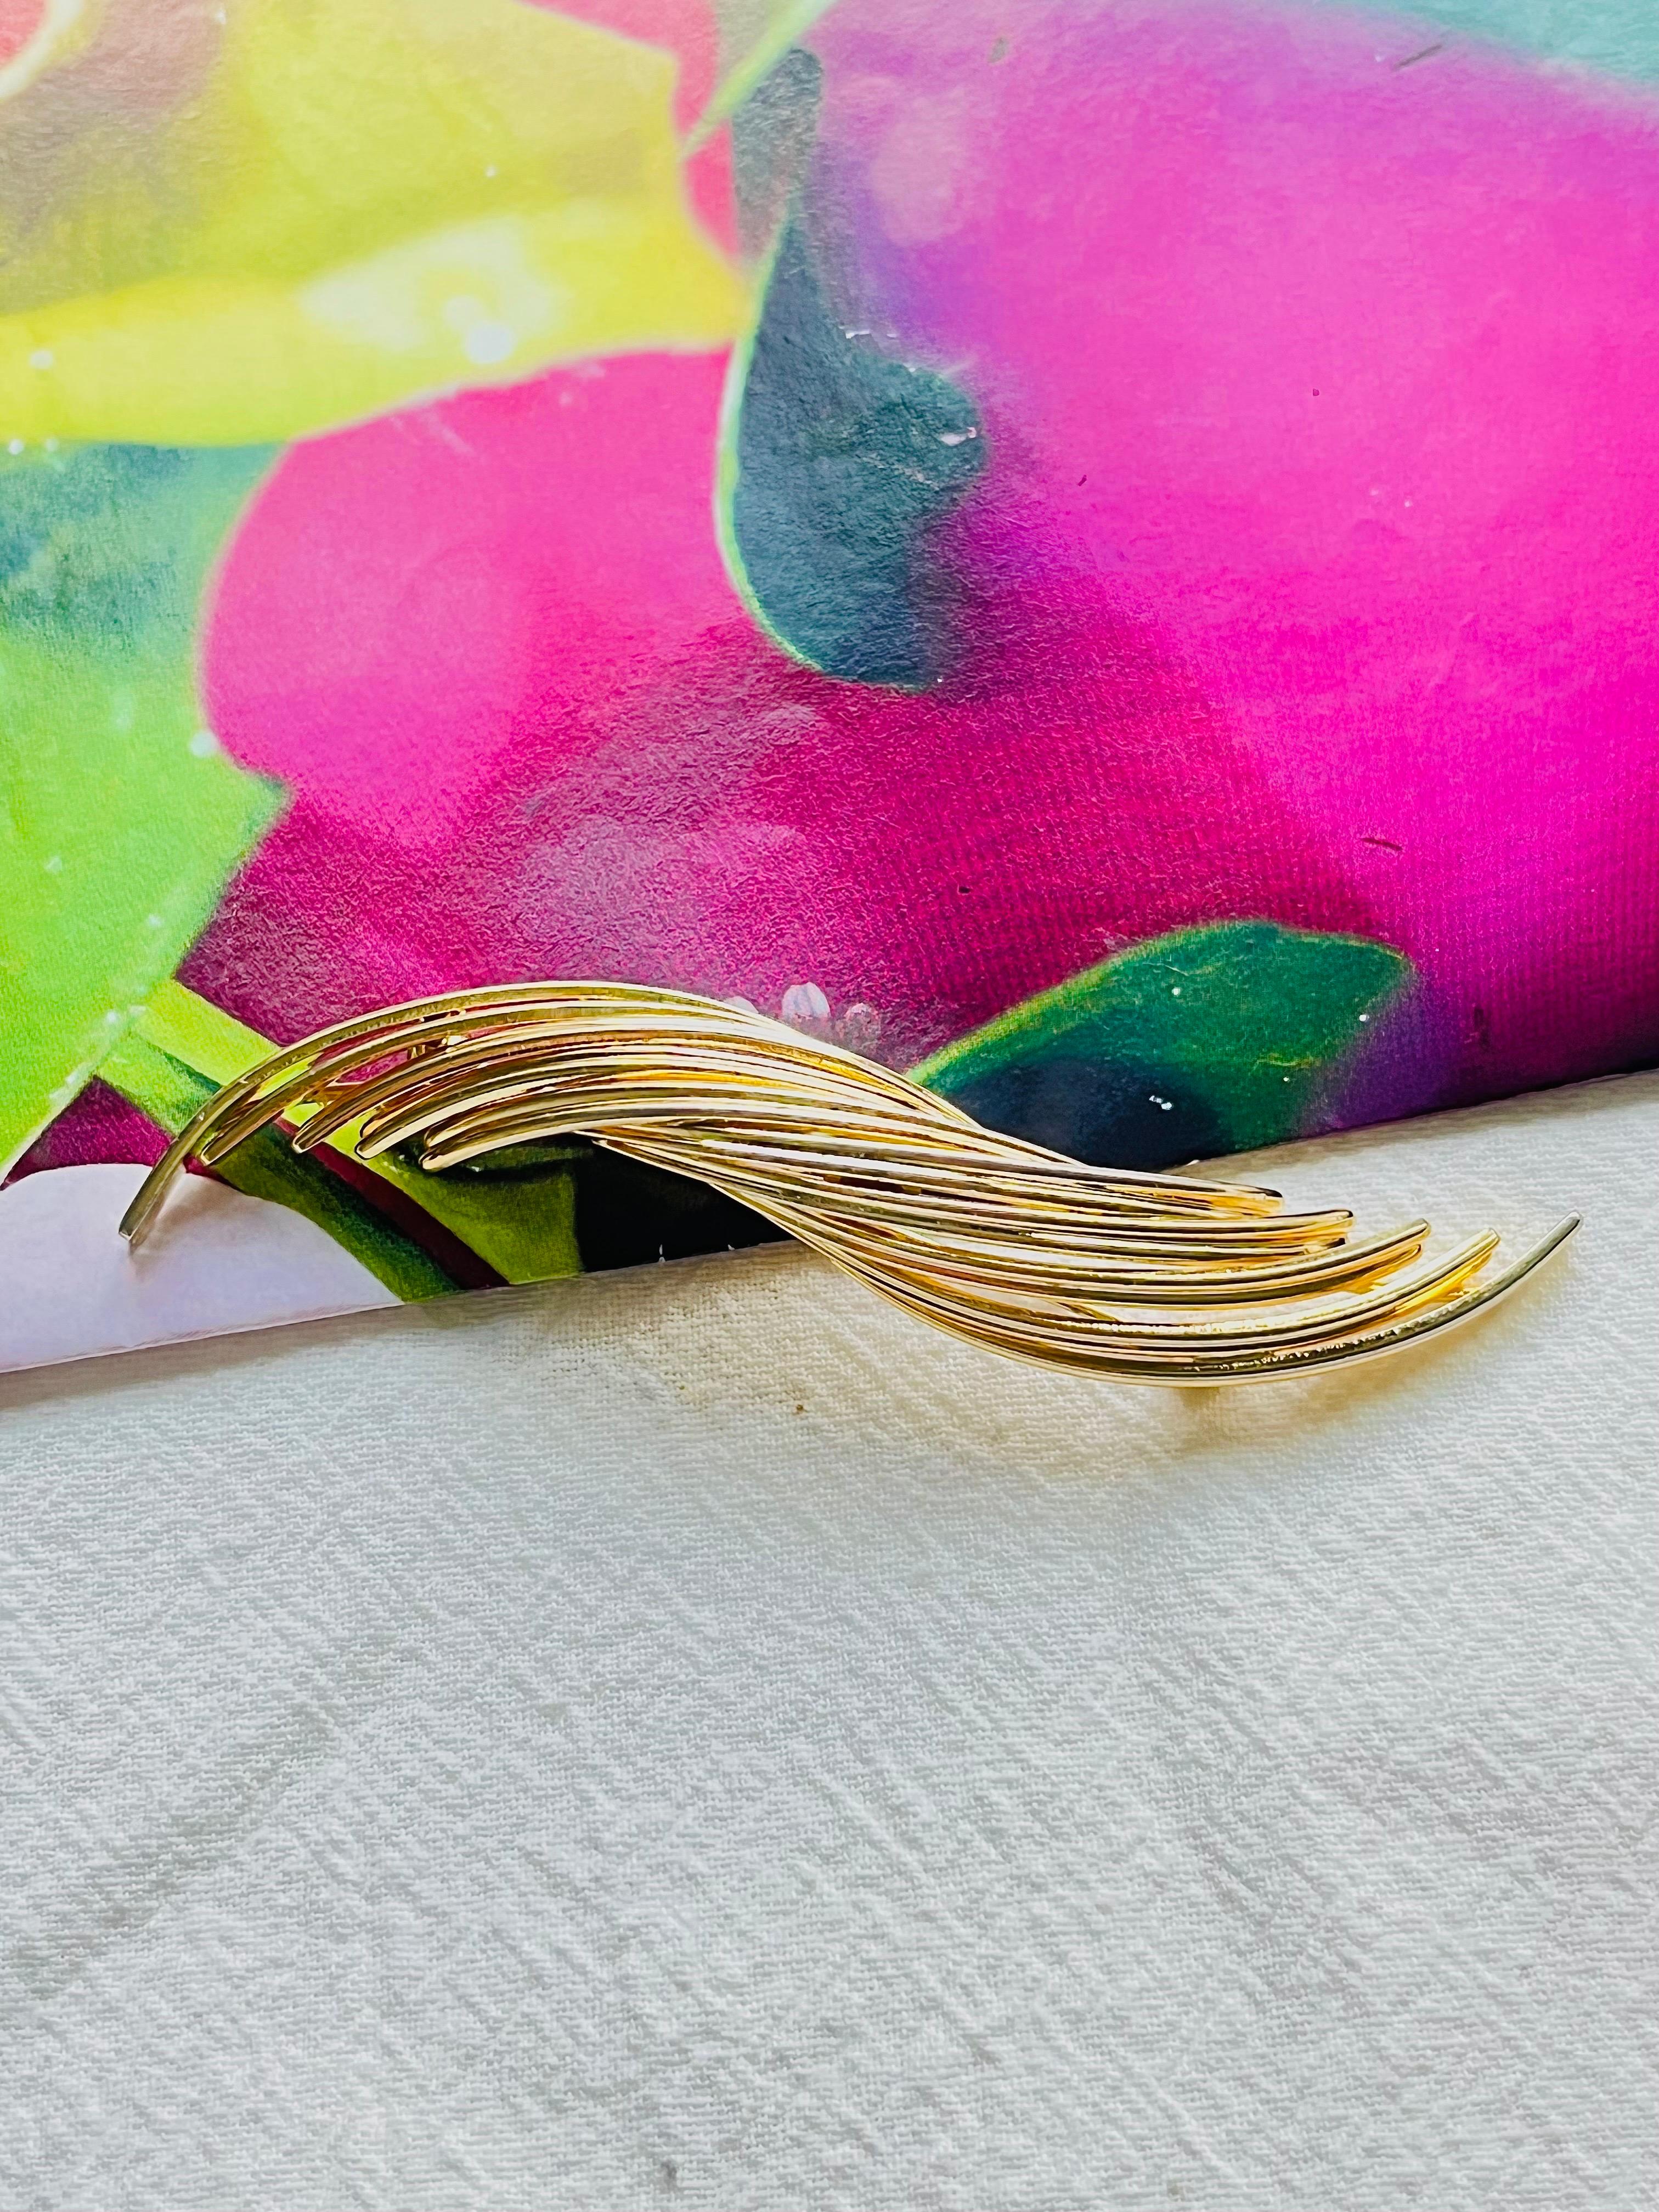 Christian Dior GROSSE 1962 Vintage Long Modernist Spiral Lines Openwork Brooch, Gold Tone

Very good condition. Maybe light scratches or colour loss, barely noticeable. 100% Genuine.

Safety-catch pin closure. Signed Grosse 1962 on the back.

Size: